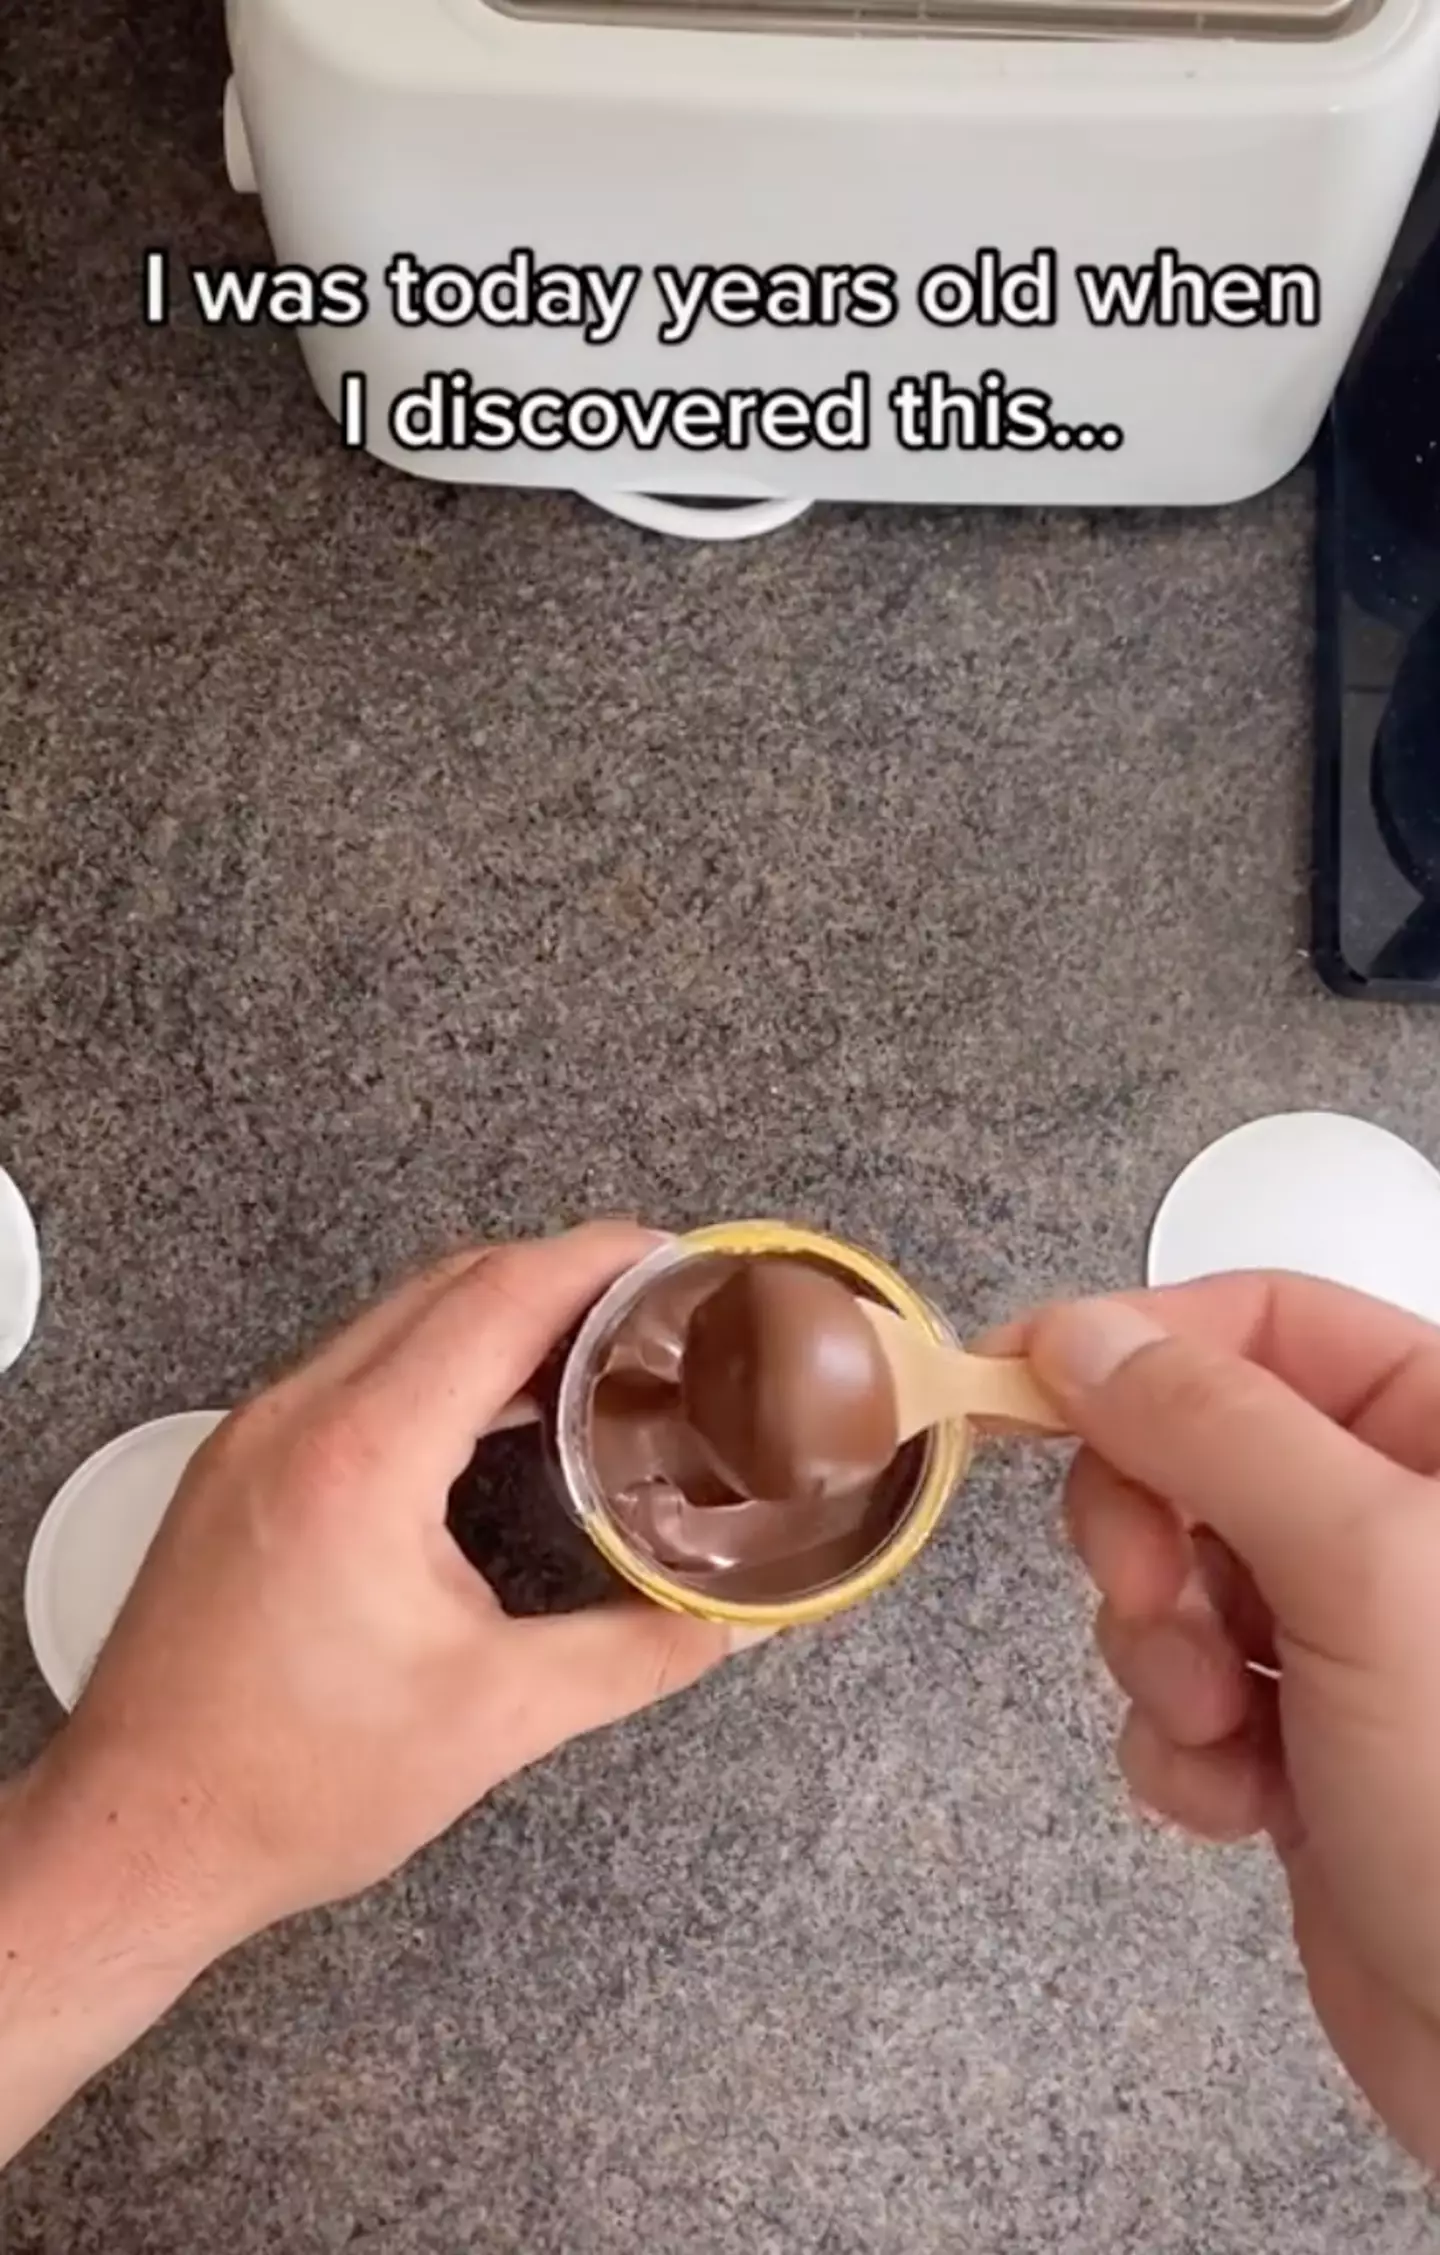 Did your Nutella jar come with a spoon? (